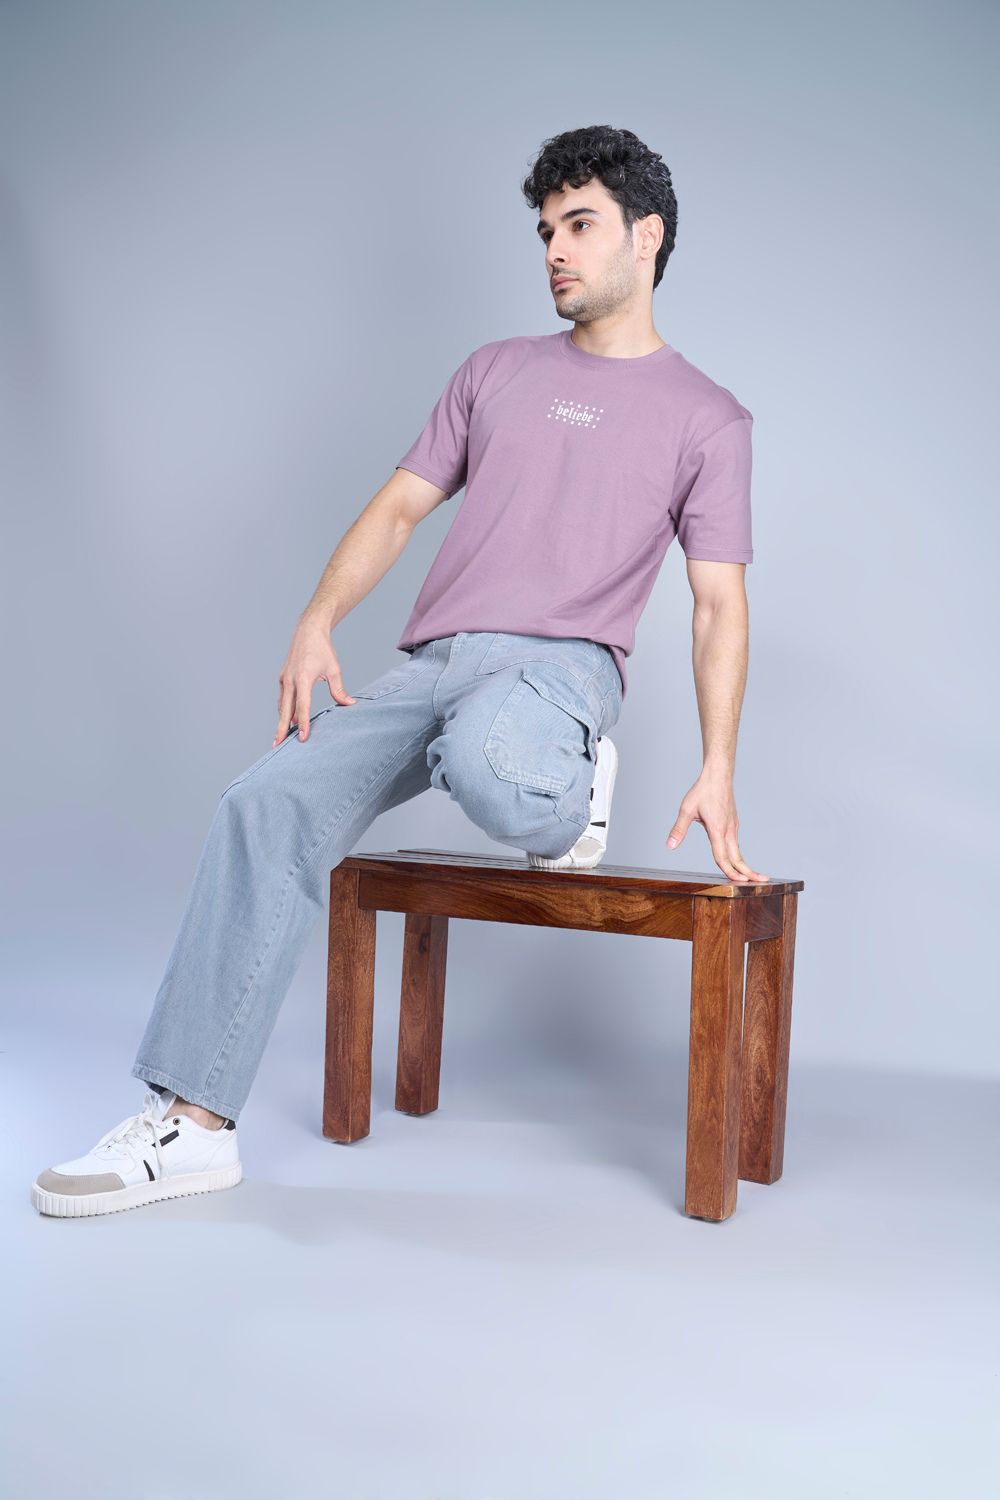 Cotton oversized T shirt for men in the solid color Opera Mauve with half sleeves and crew neck.